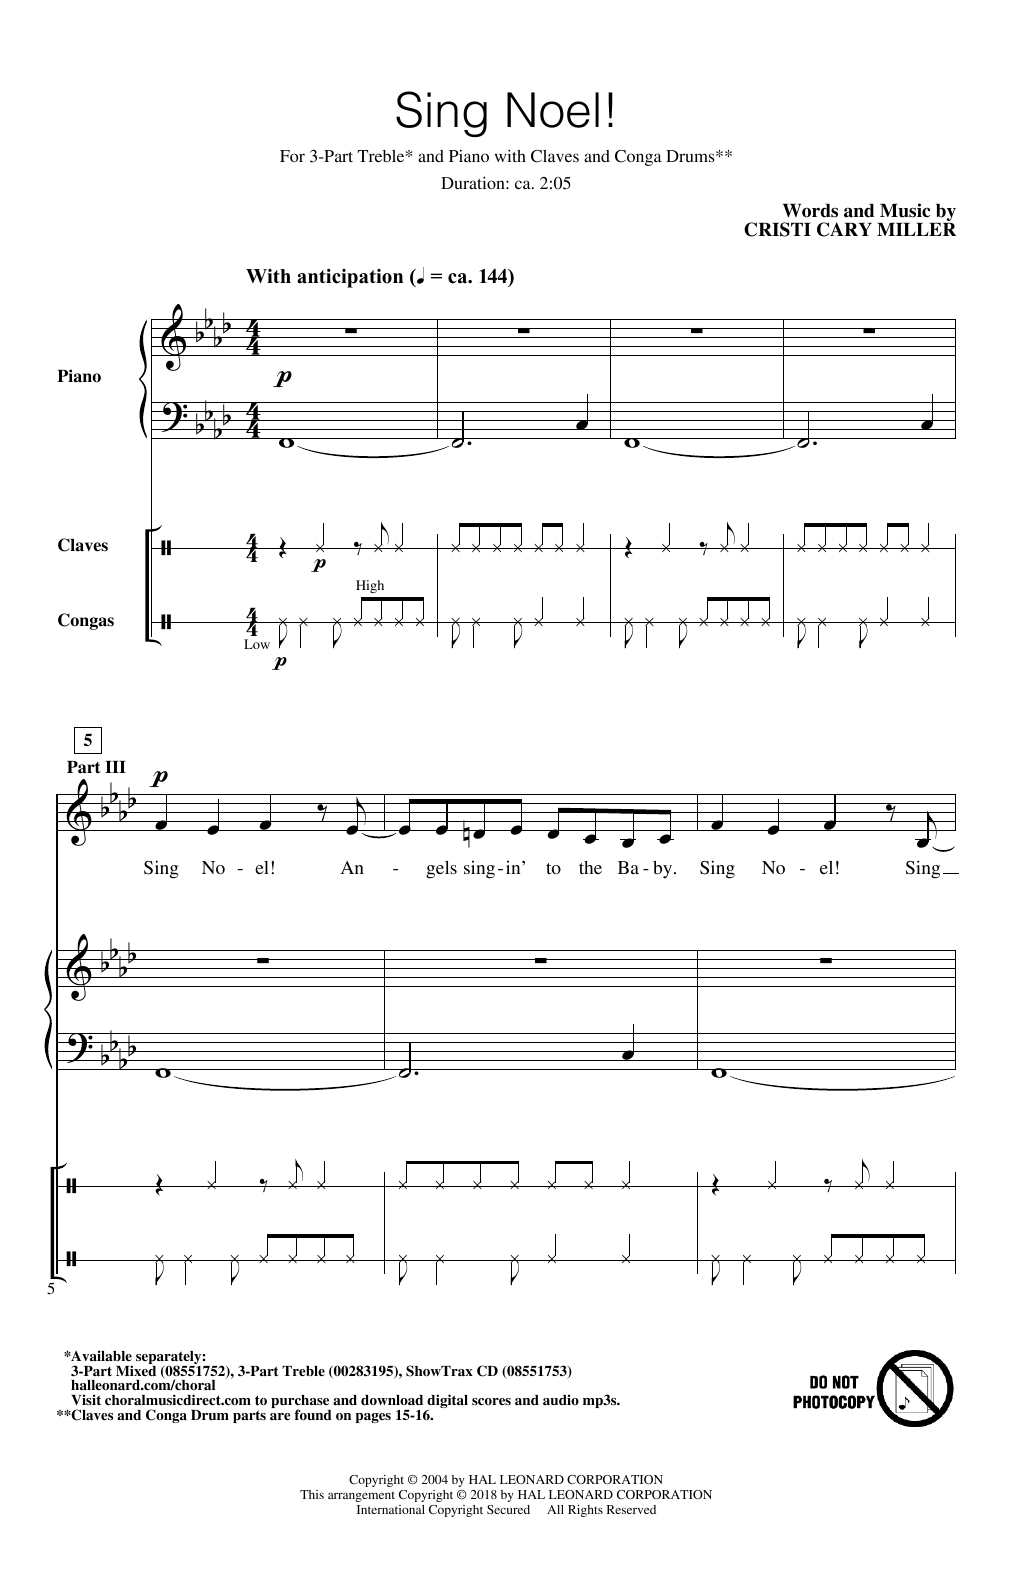 Cristi Cary Miller Sing Noel! sheet music notes and chords arranged for 3-Part Treble Choir